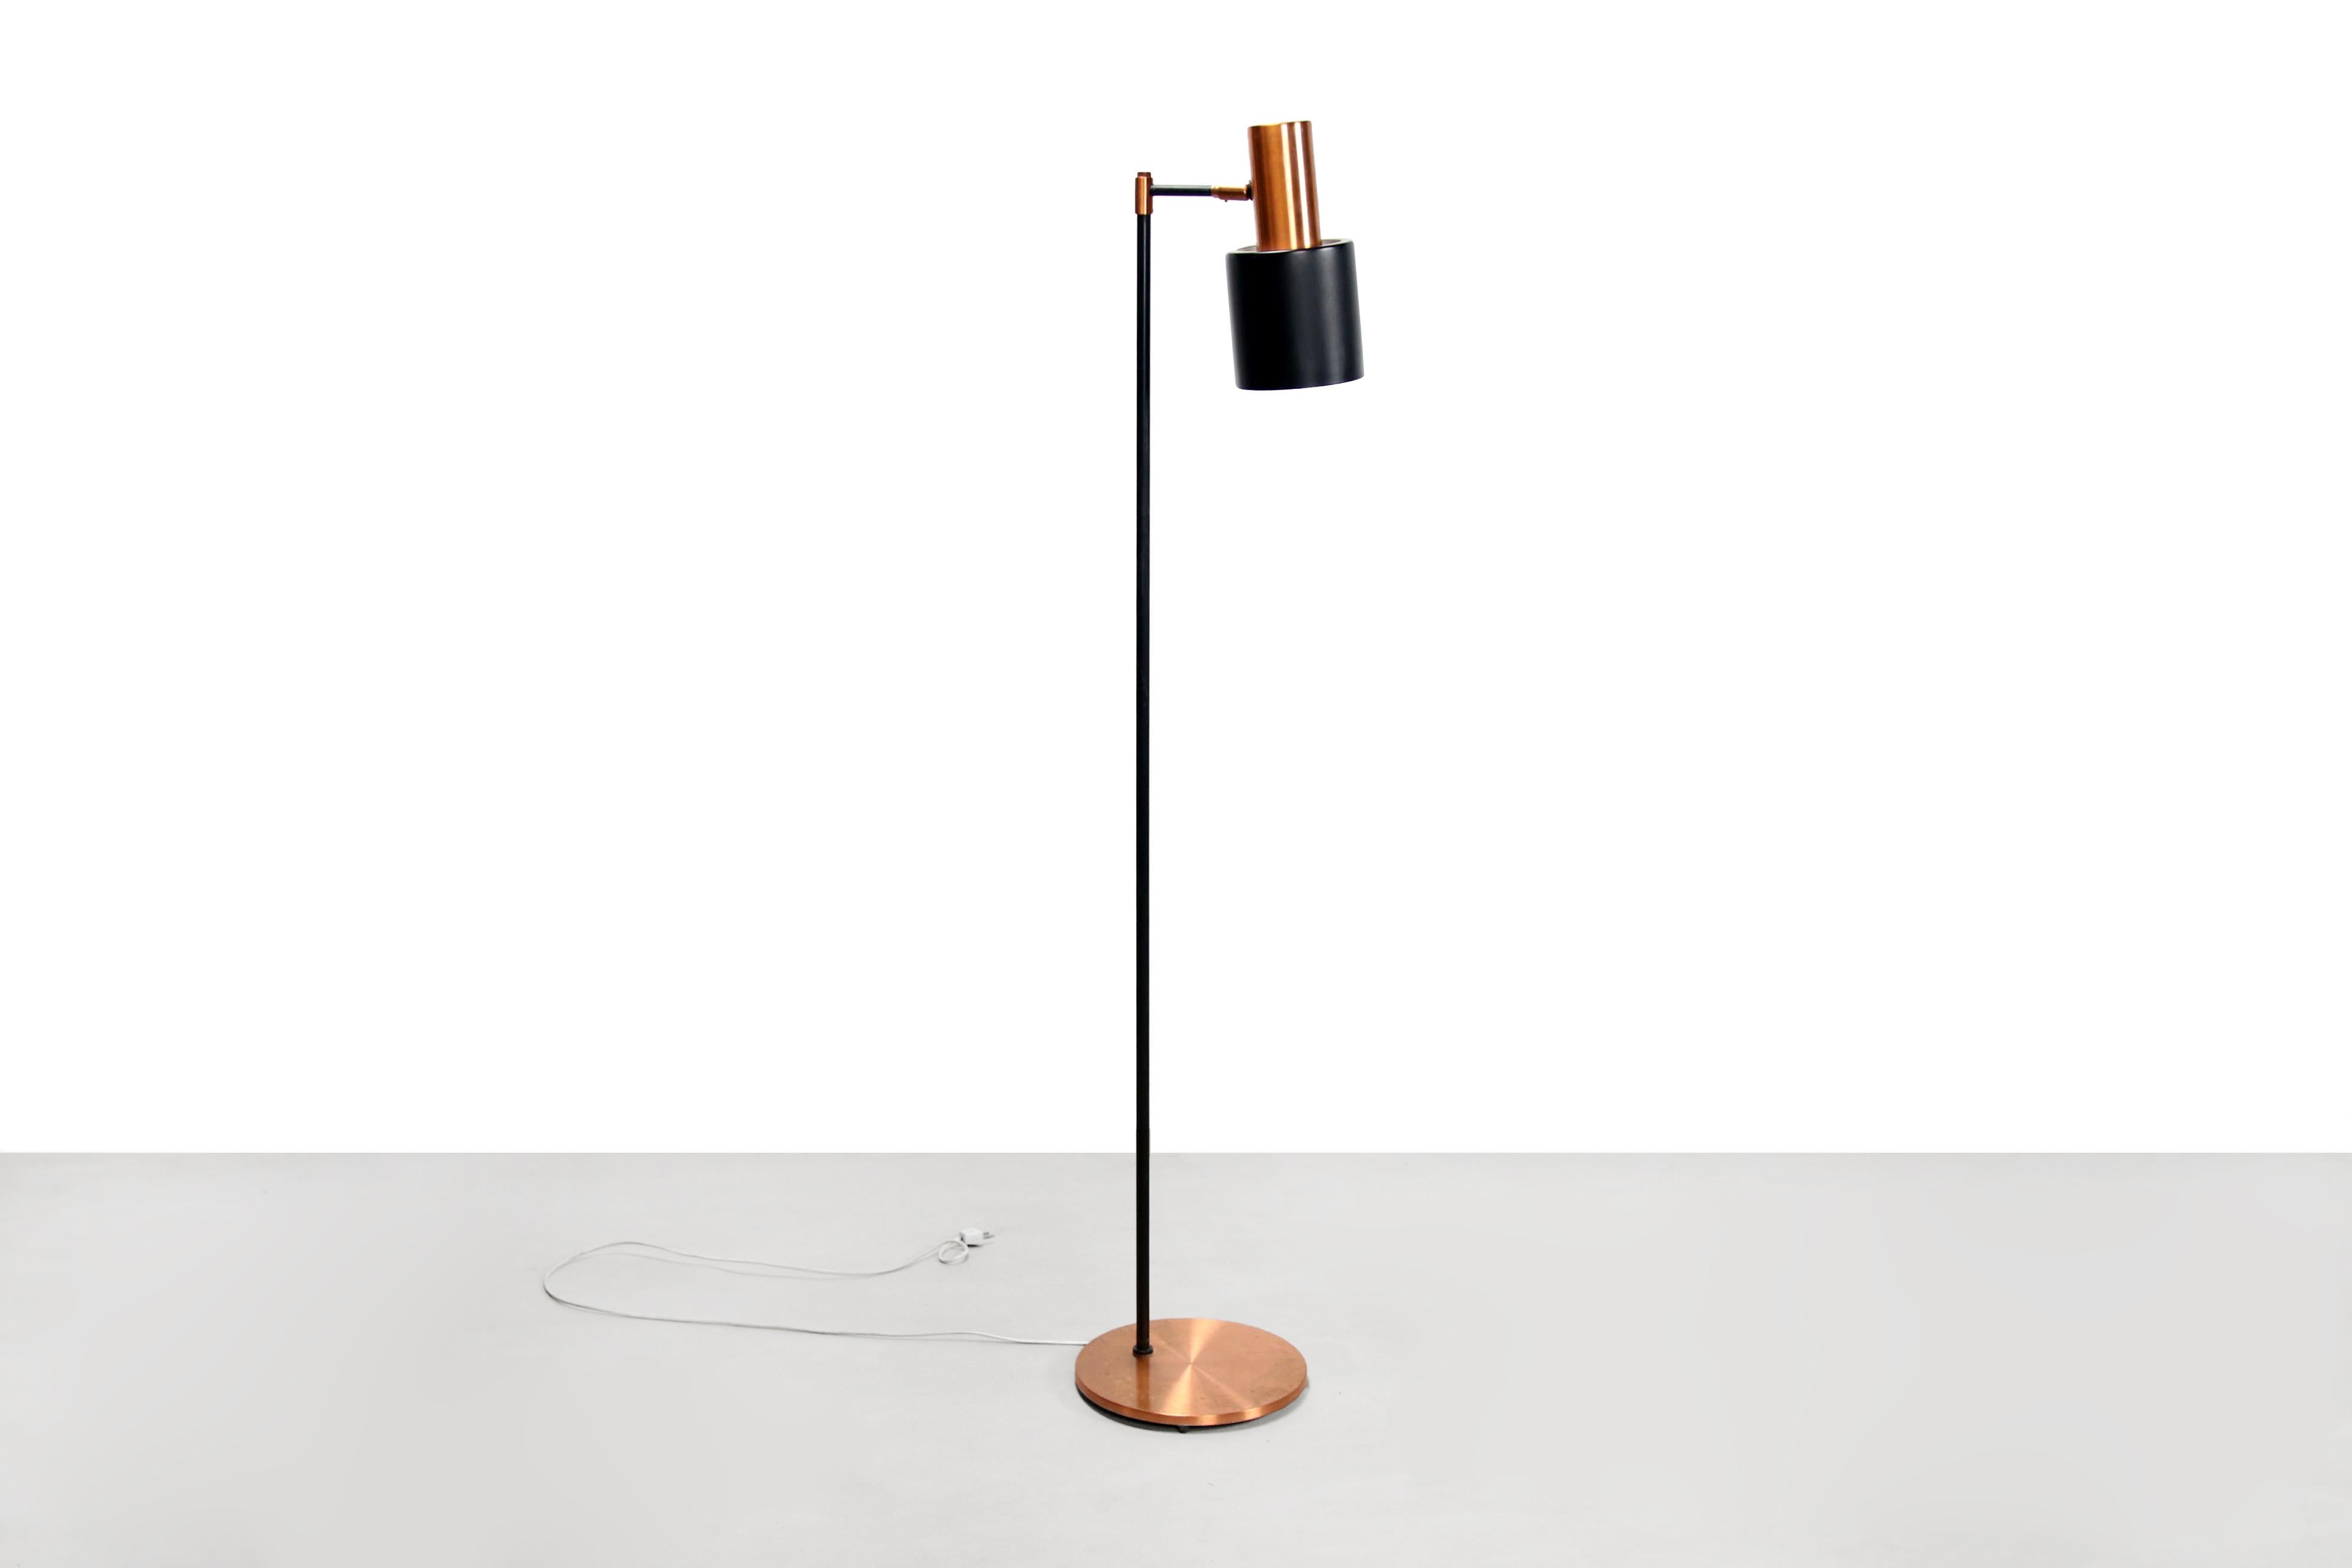 Beautiful floor lamp designed by Jo Hammerborg in 1963. The lamp is called 